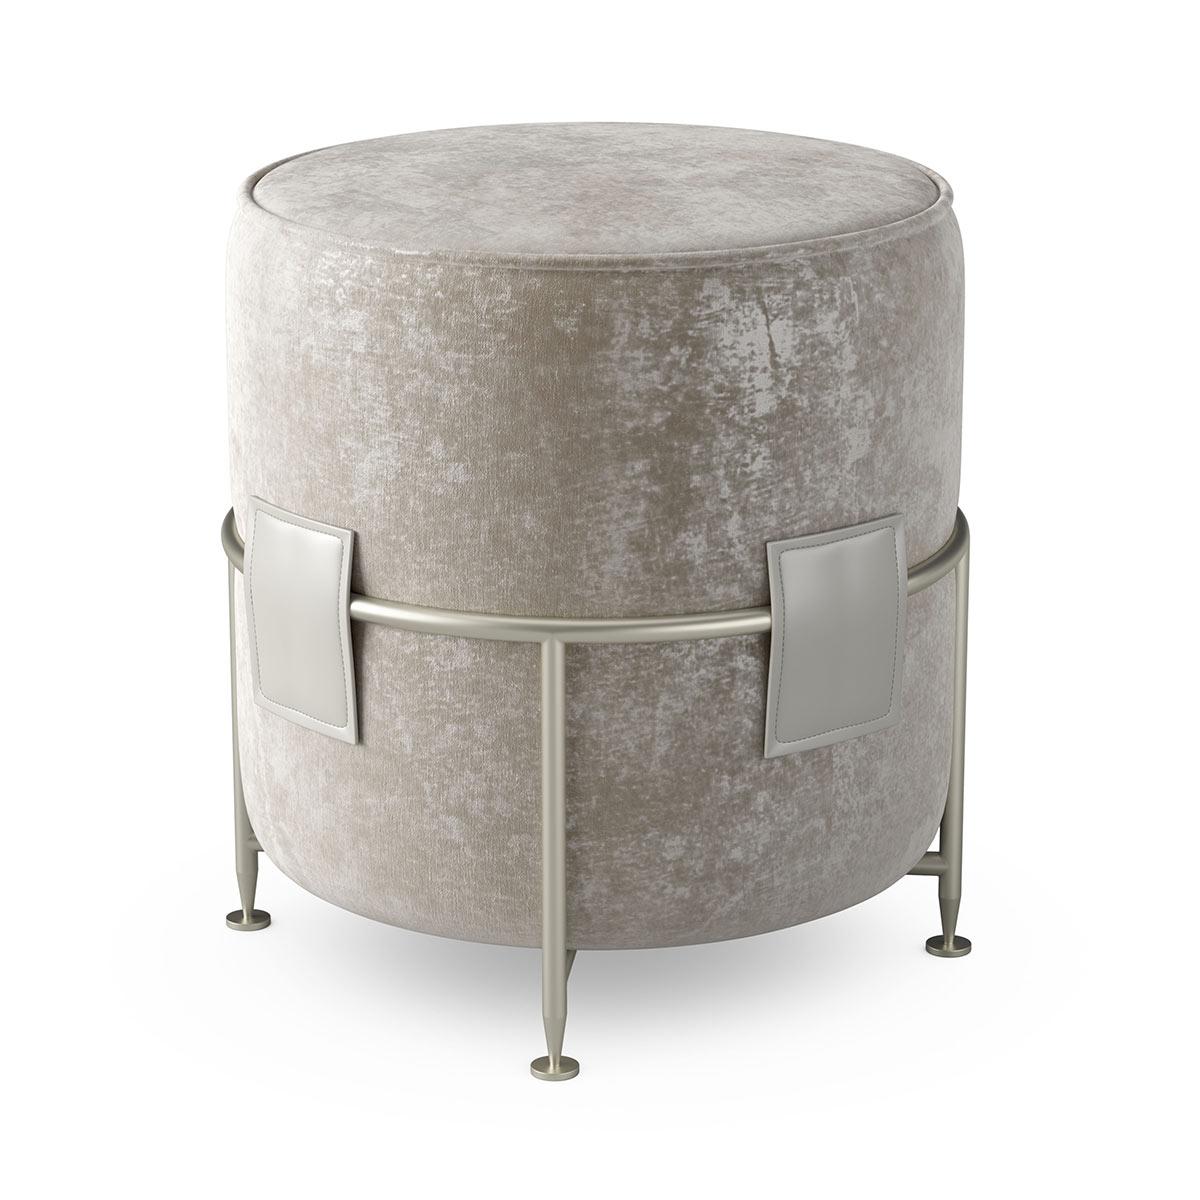 Other Beautiful High Pouf Amaretto Collection Available in Different Colors For Sale